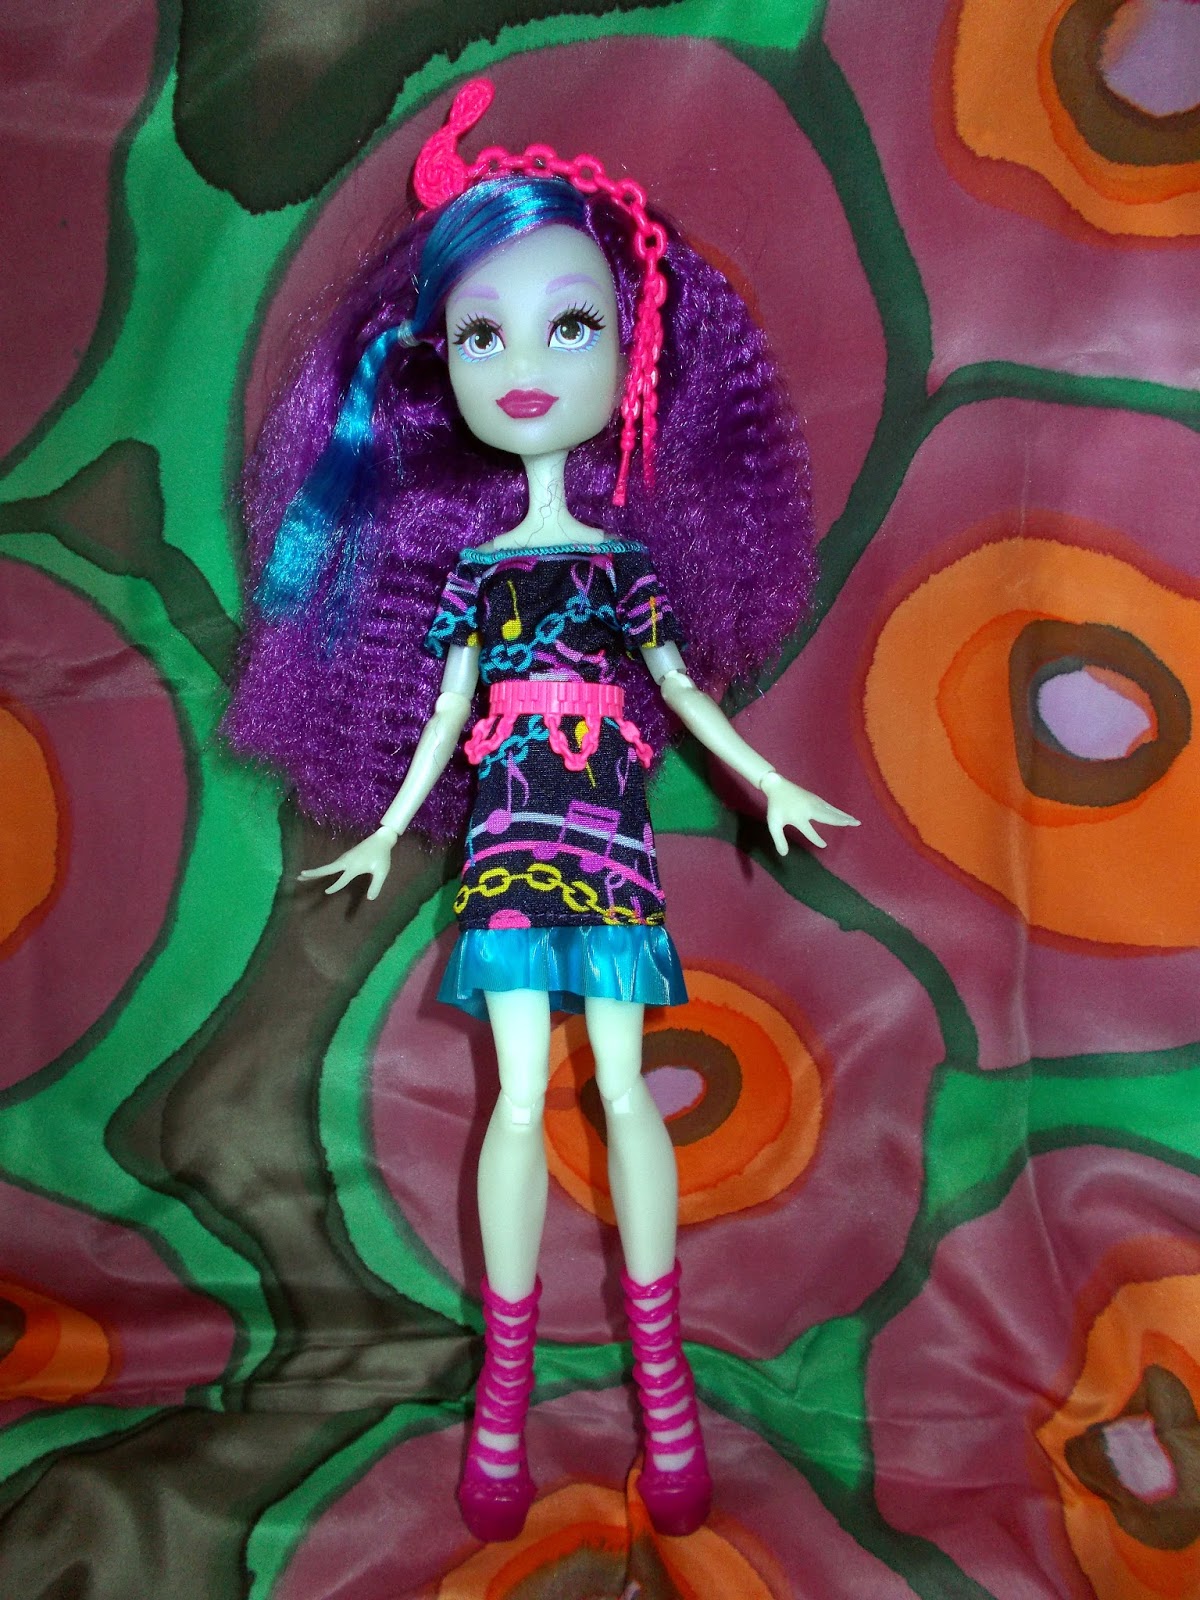 REVIEW: Electrified Draculaura